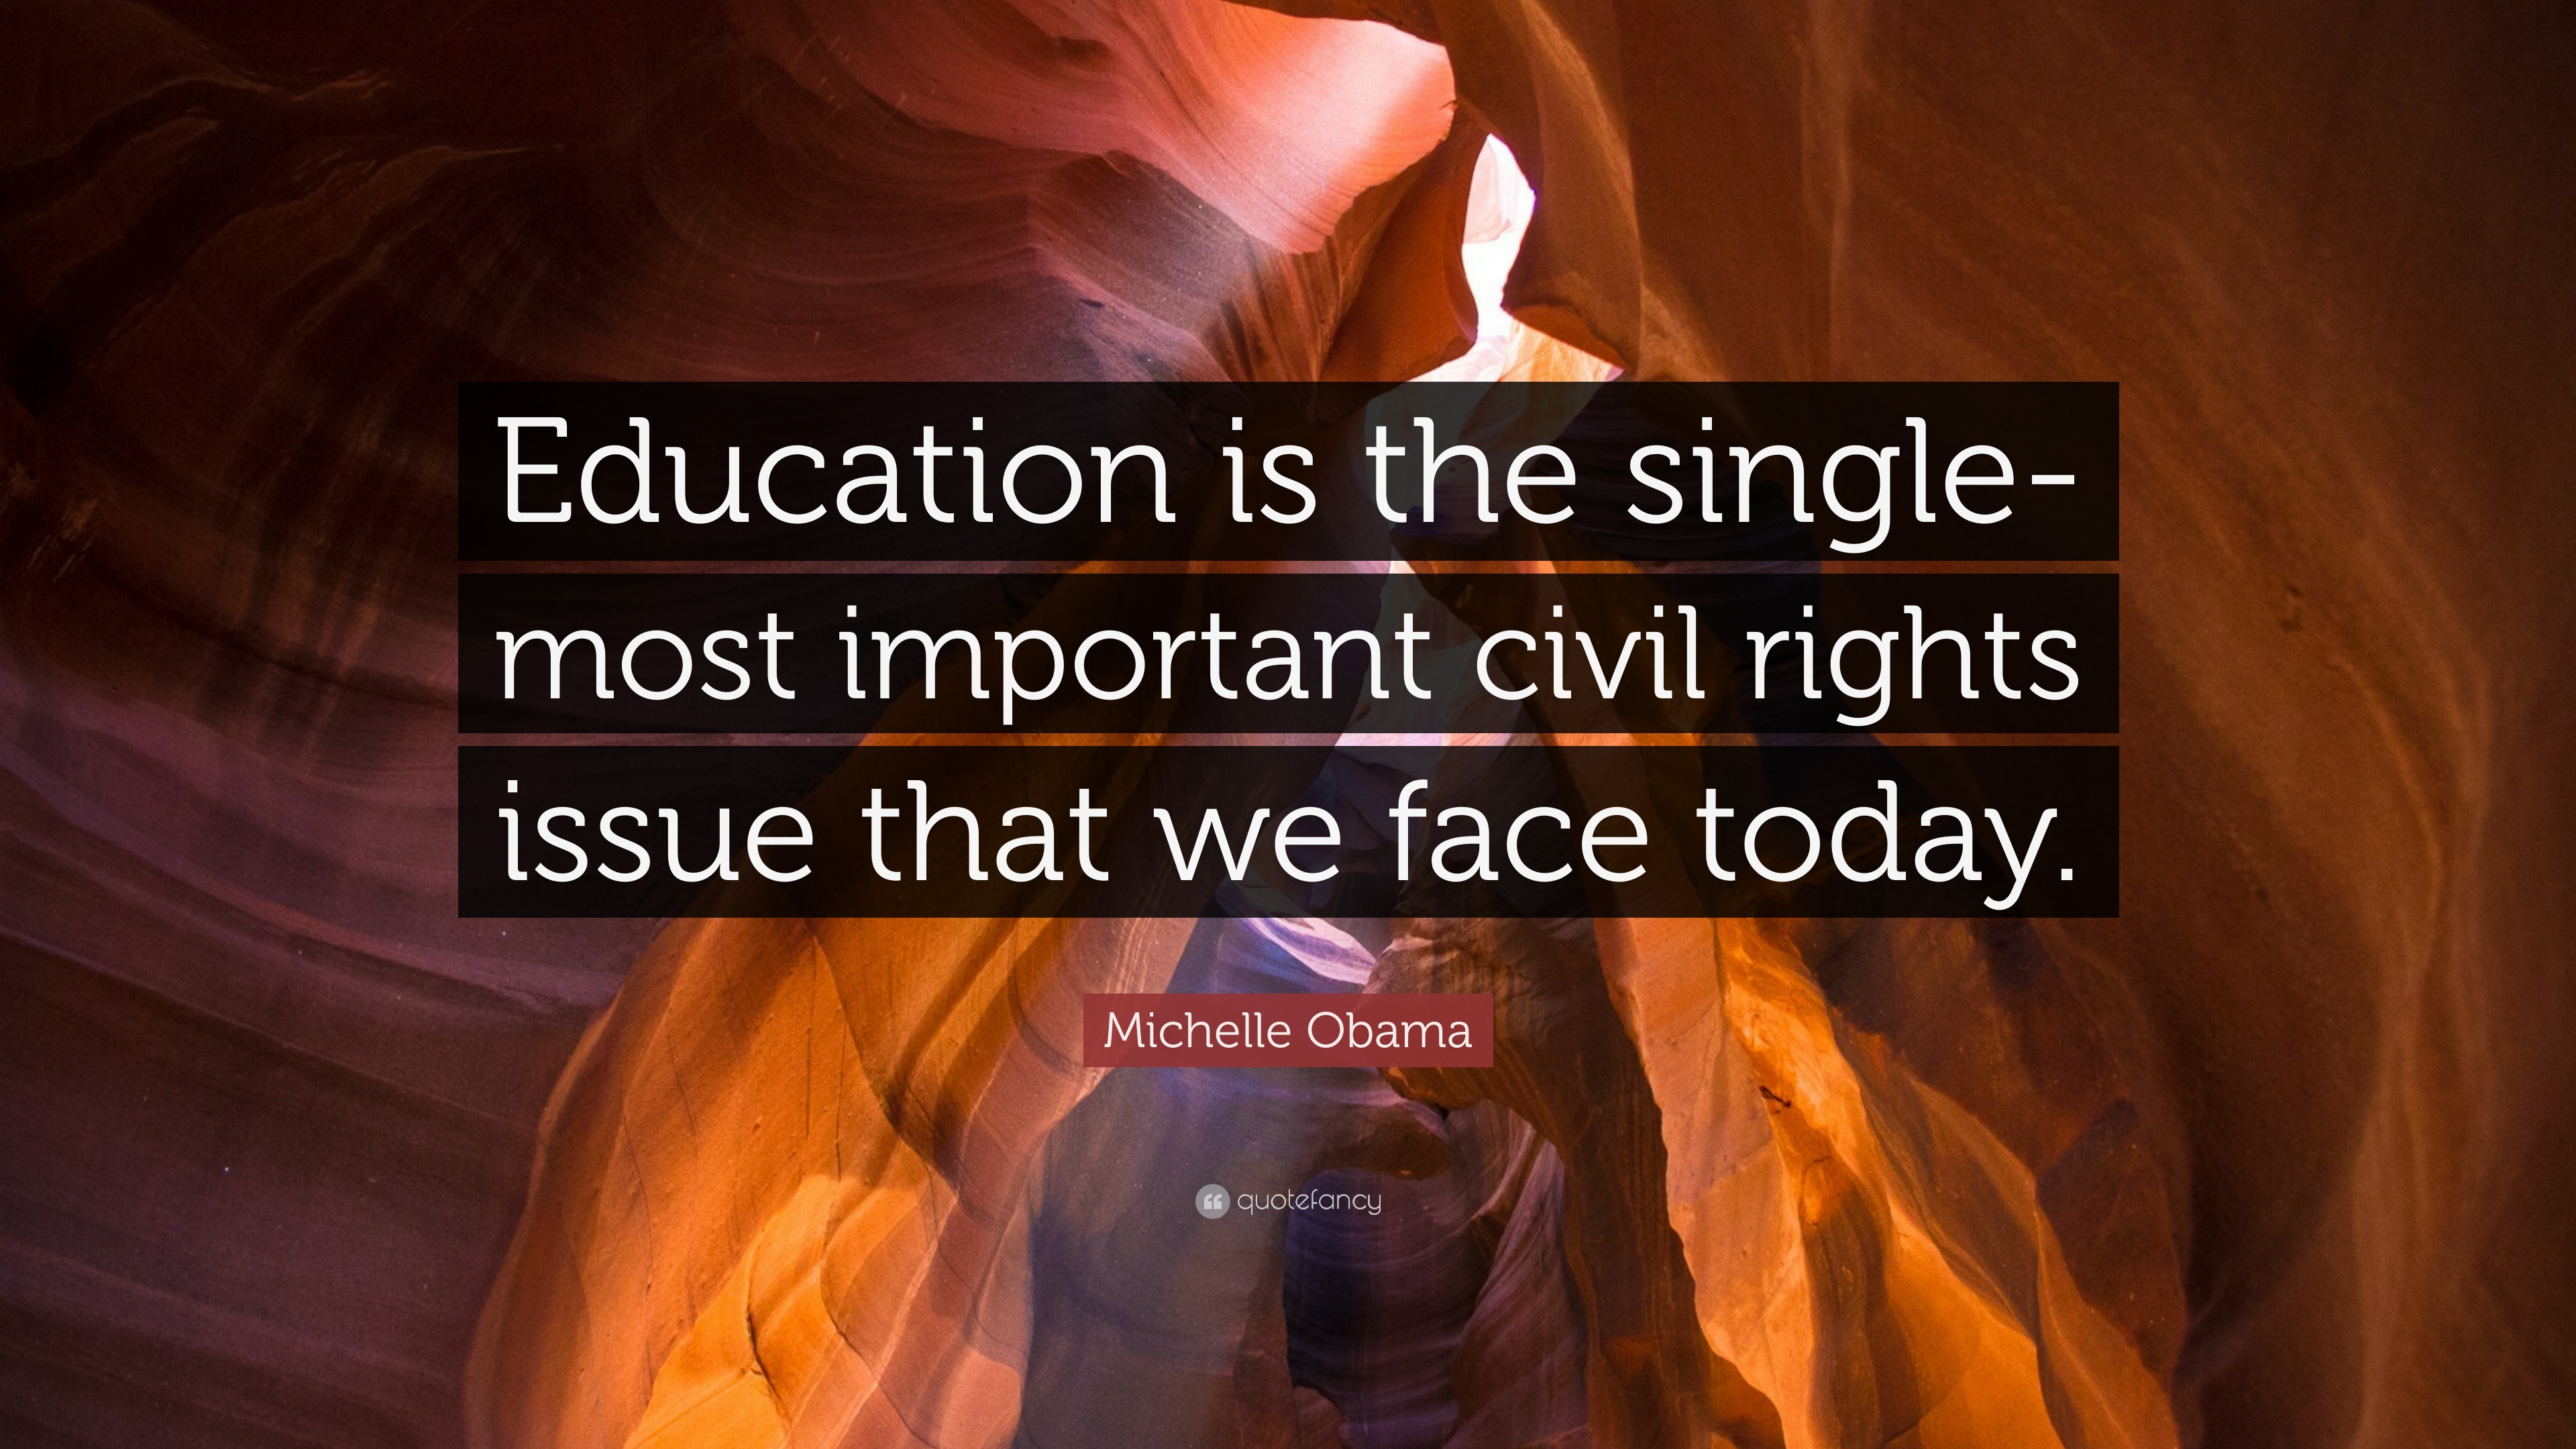 Michelle Obama Quote: “Education Is The Single Most Important Civil Rights Issue That We Face Today.”